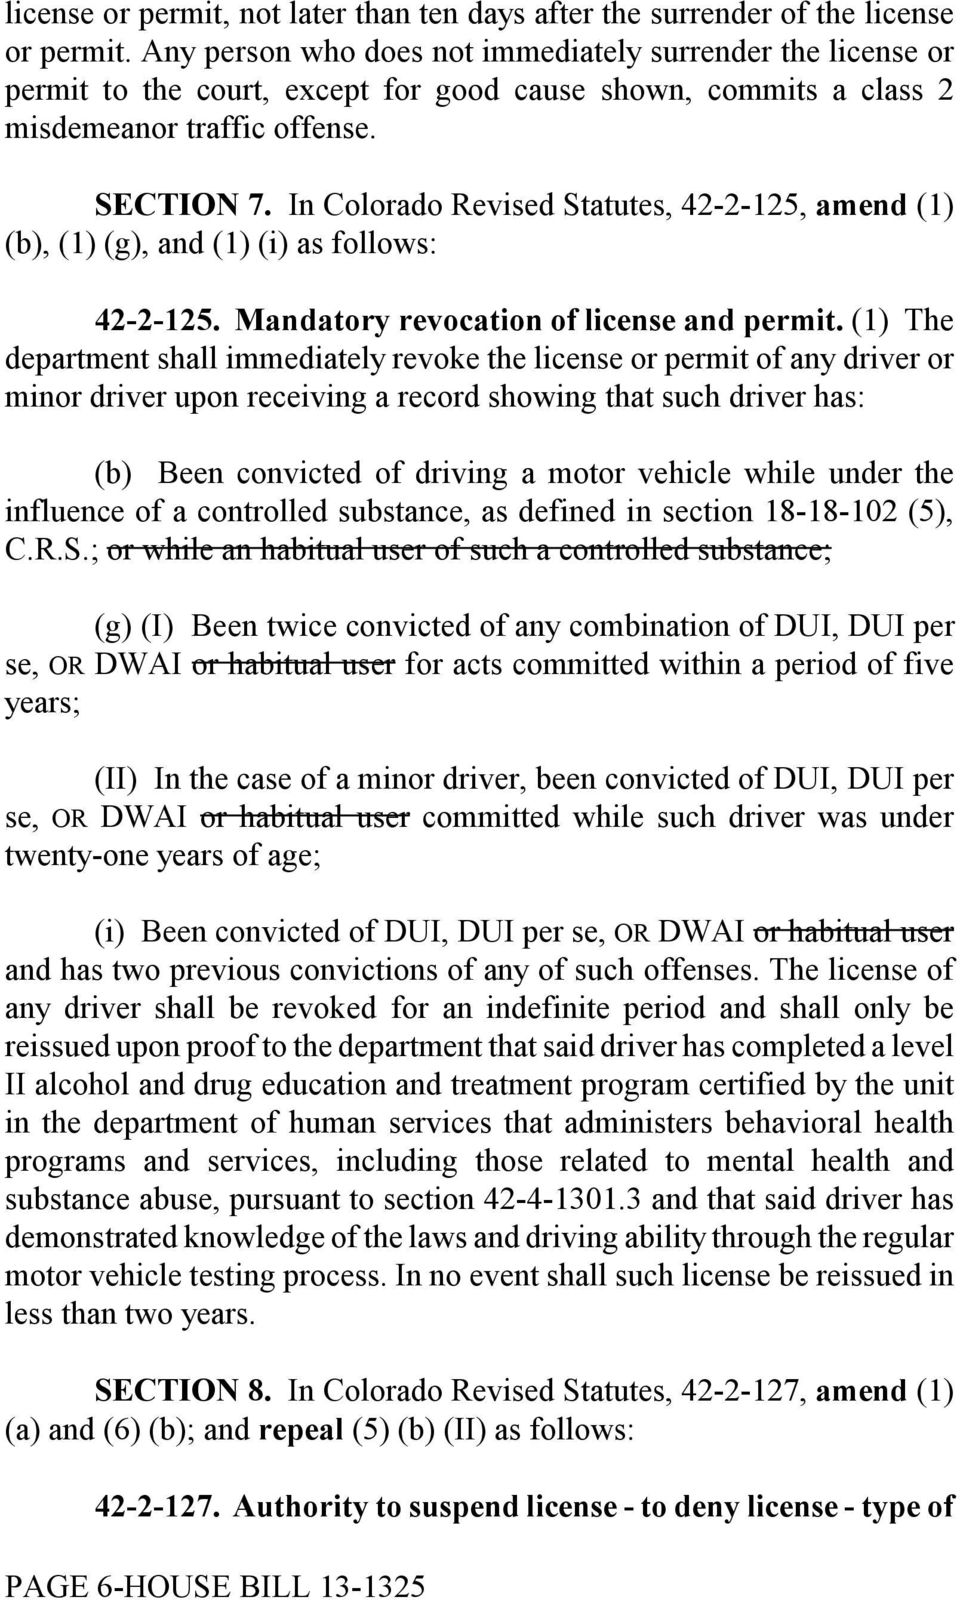 In Colorado Revised Statutes, 42-2-125, amend (1) (b), (1) (g), and (1) (i) as follows: 42-2-125. Mandatory revocation of license and permit.